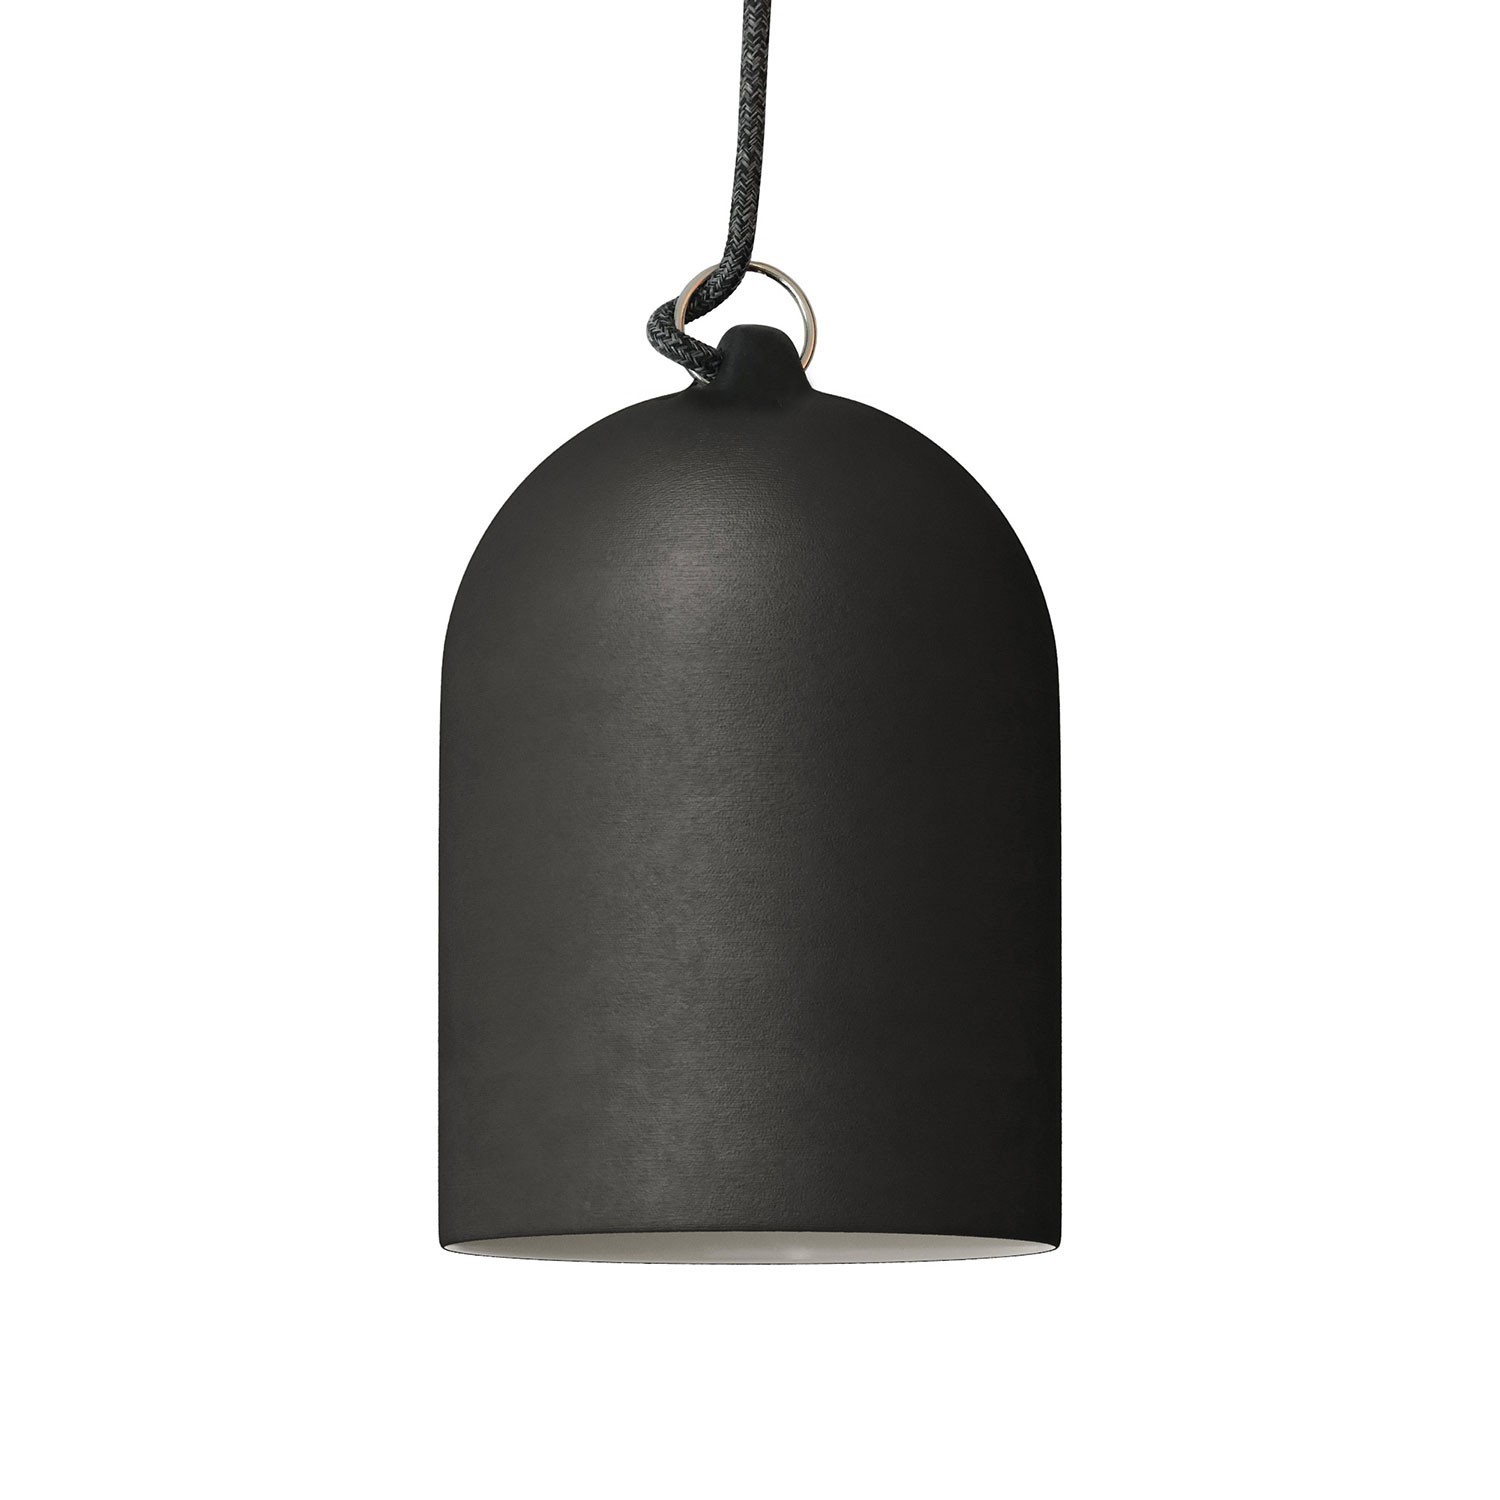 Pendant lamp with textile cable and lampshade Mini Bell XS ceramic shade - Made in Italy - Bulb included